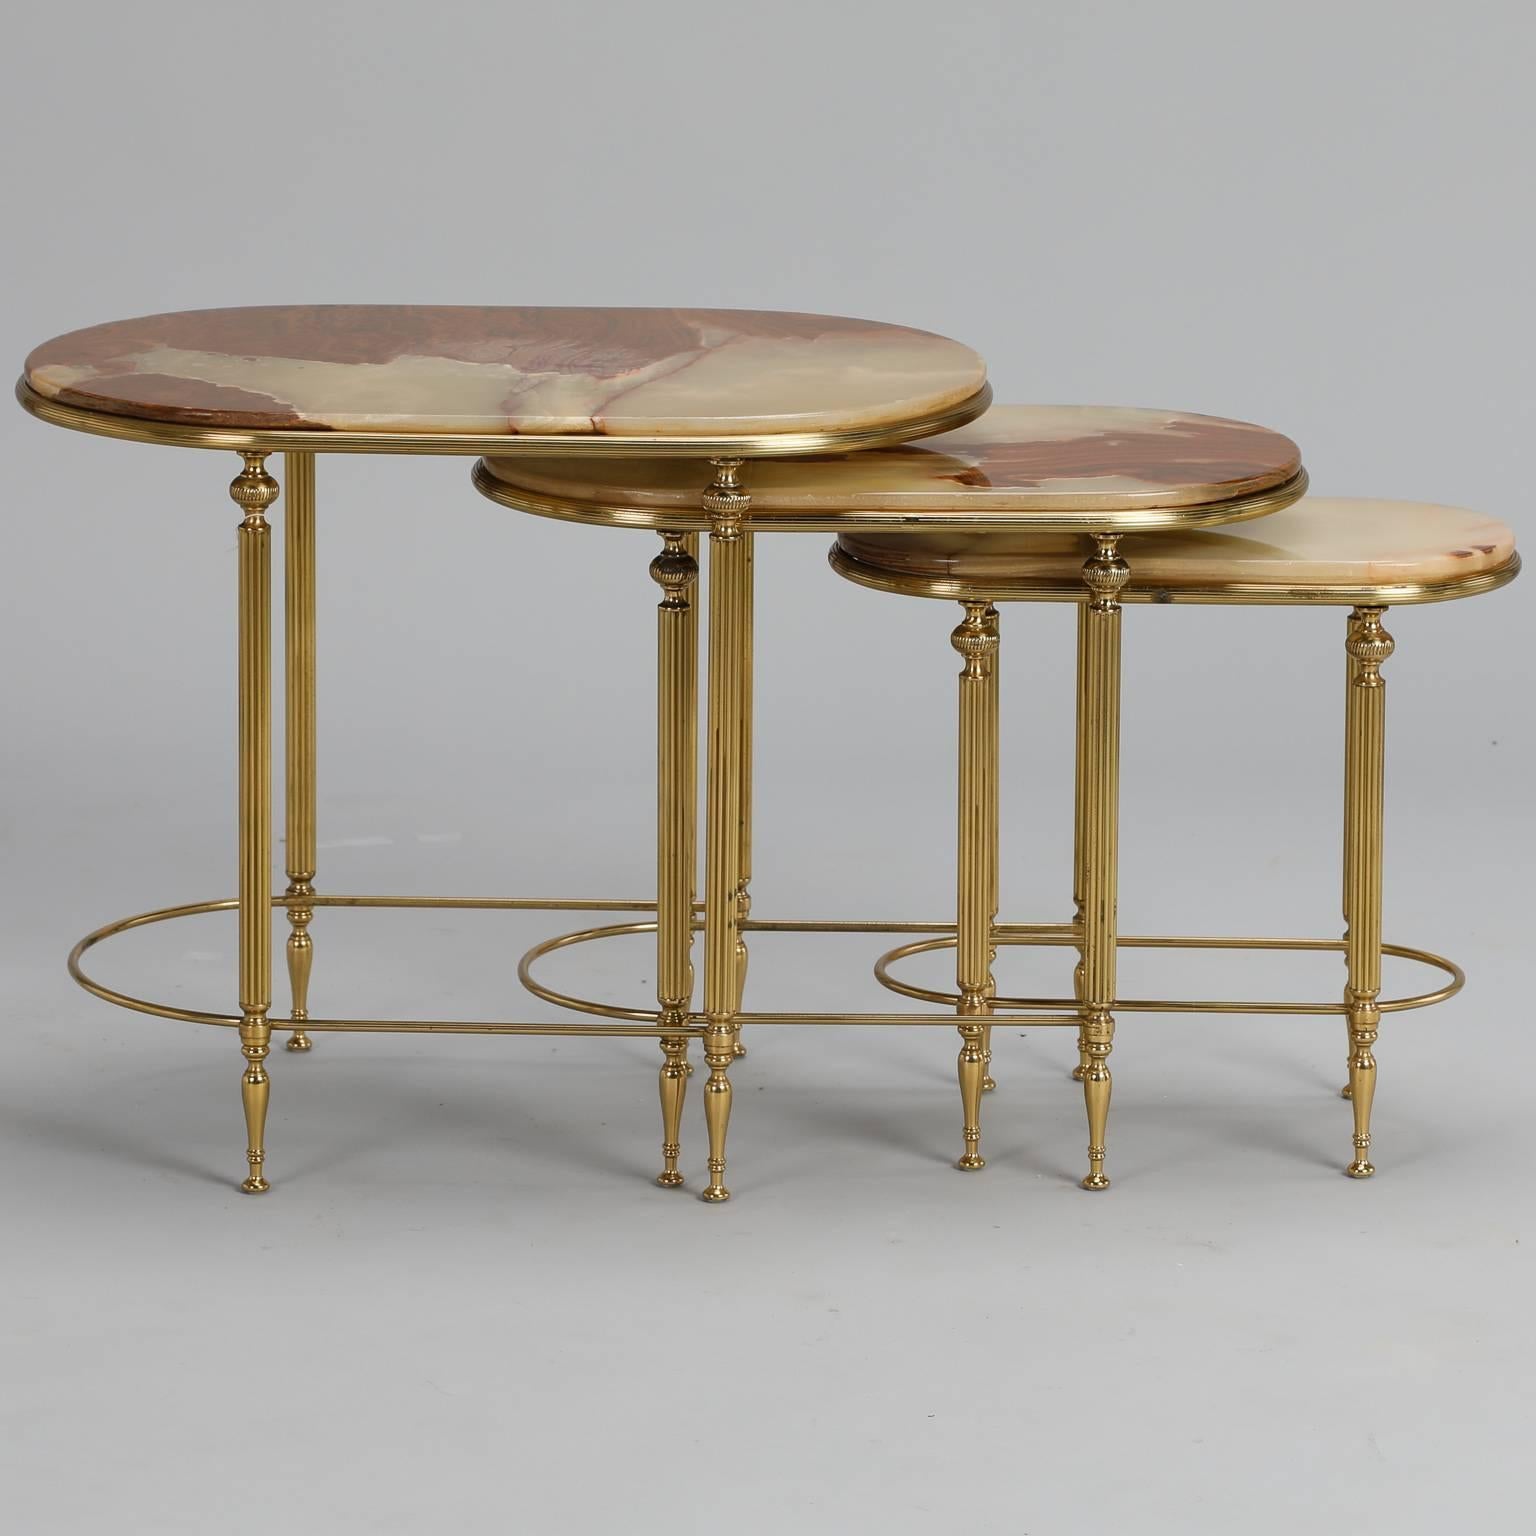 Neoclassical Trio of Stacking Onyx and Brass Tables